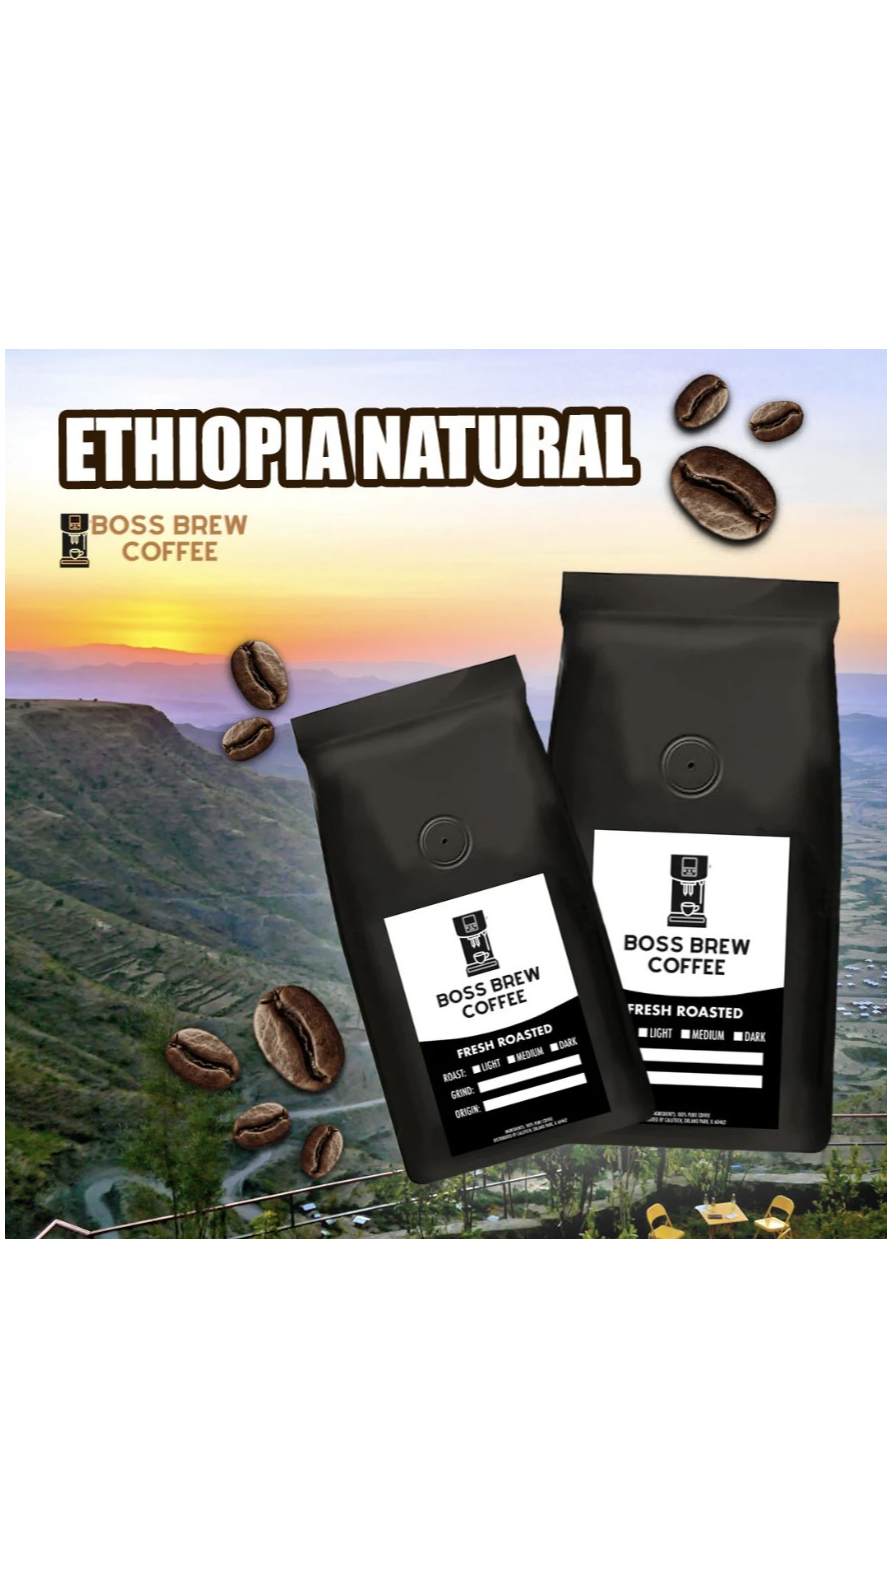 Get The Best Ethiopian Sidama Coffee Handpicked & Certified For Small Batches